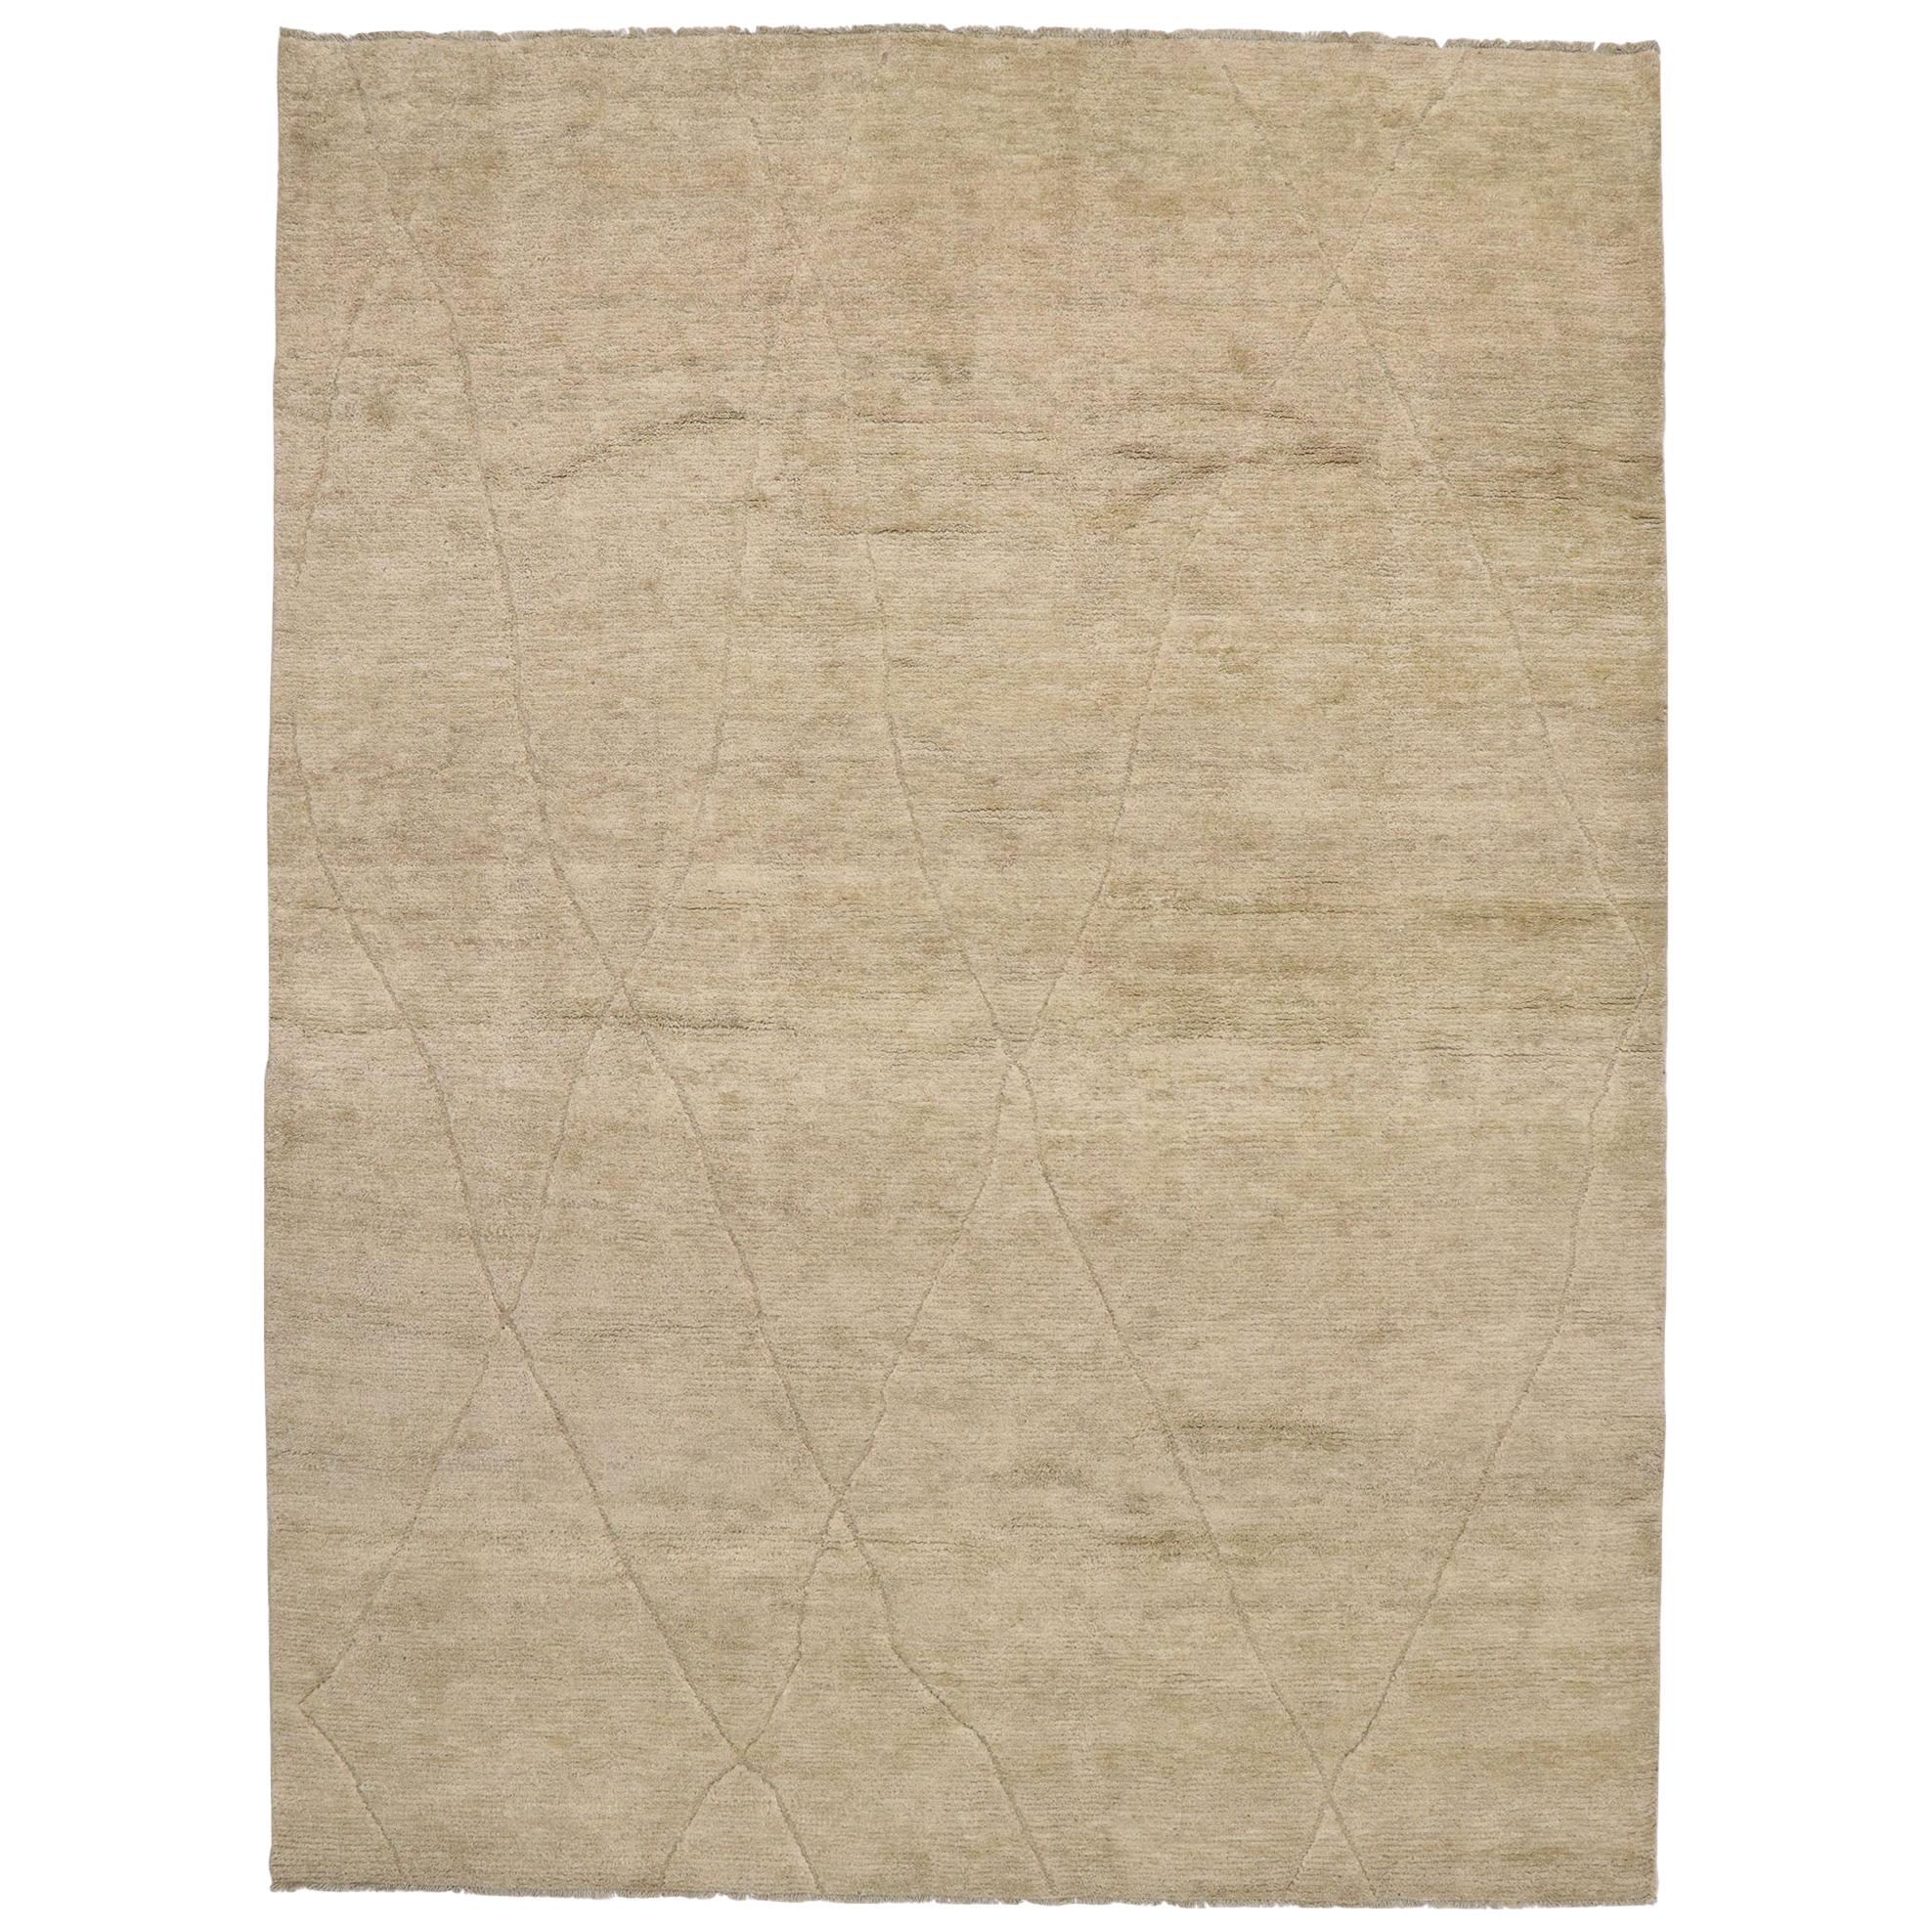 New Contemporary Moroccan Rug with Minimalist Swedish Mysigt Style For Sale